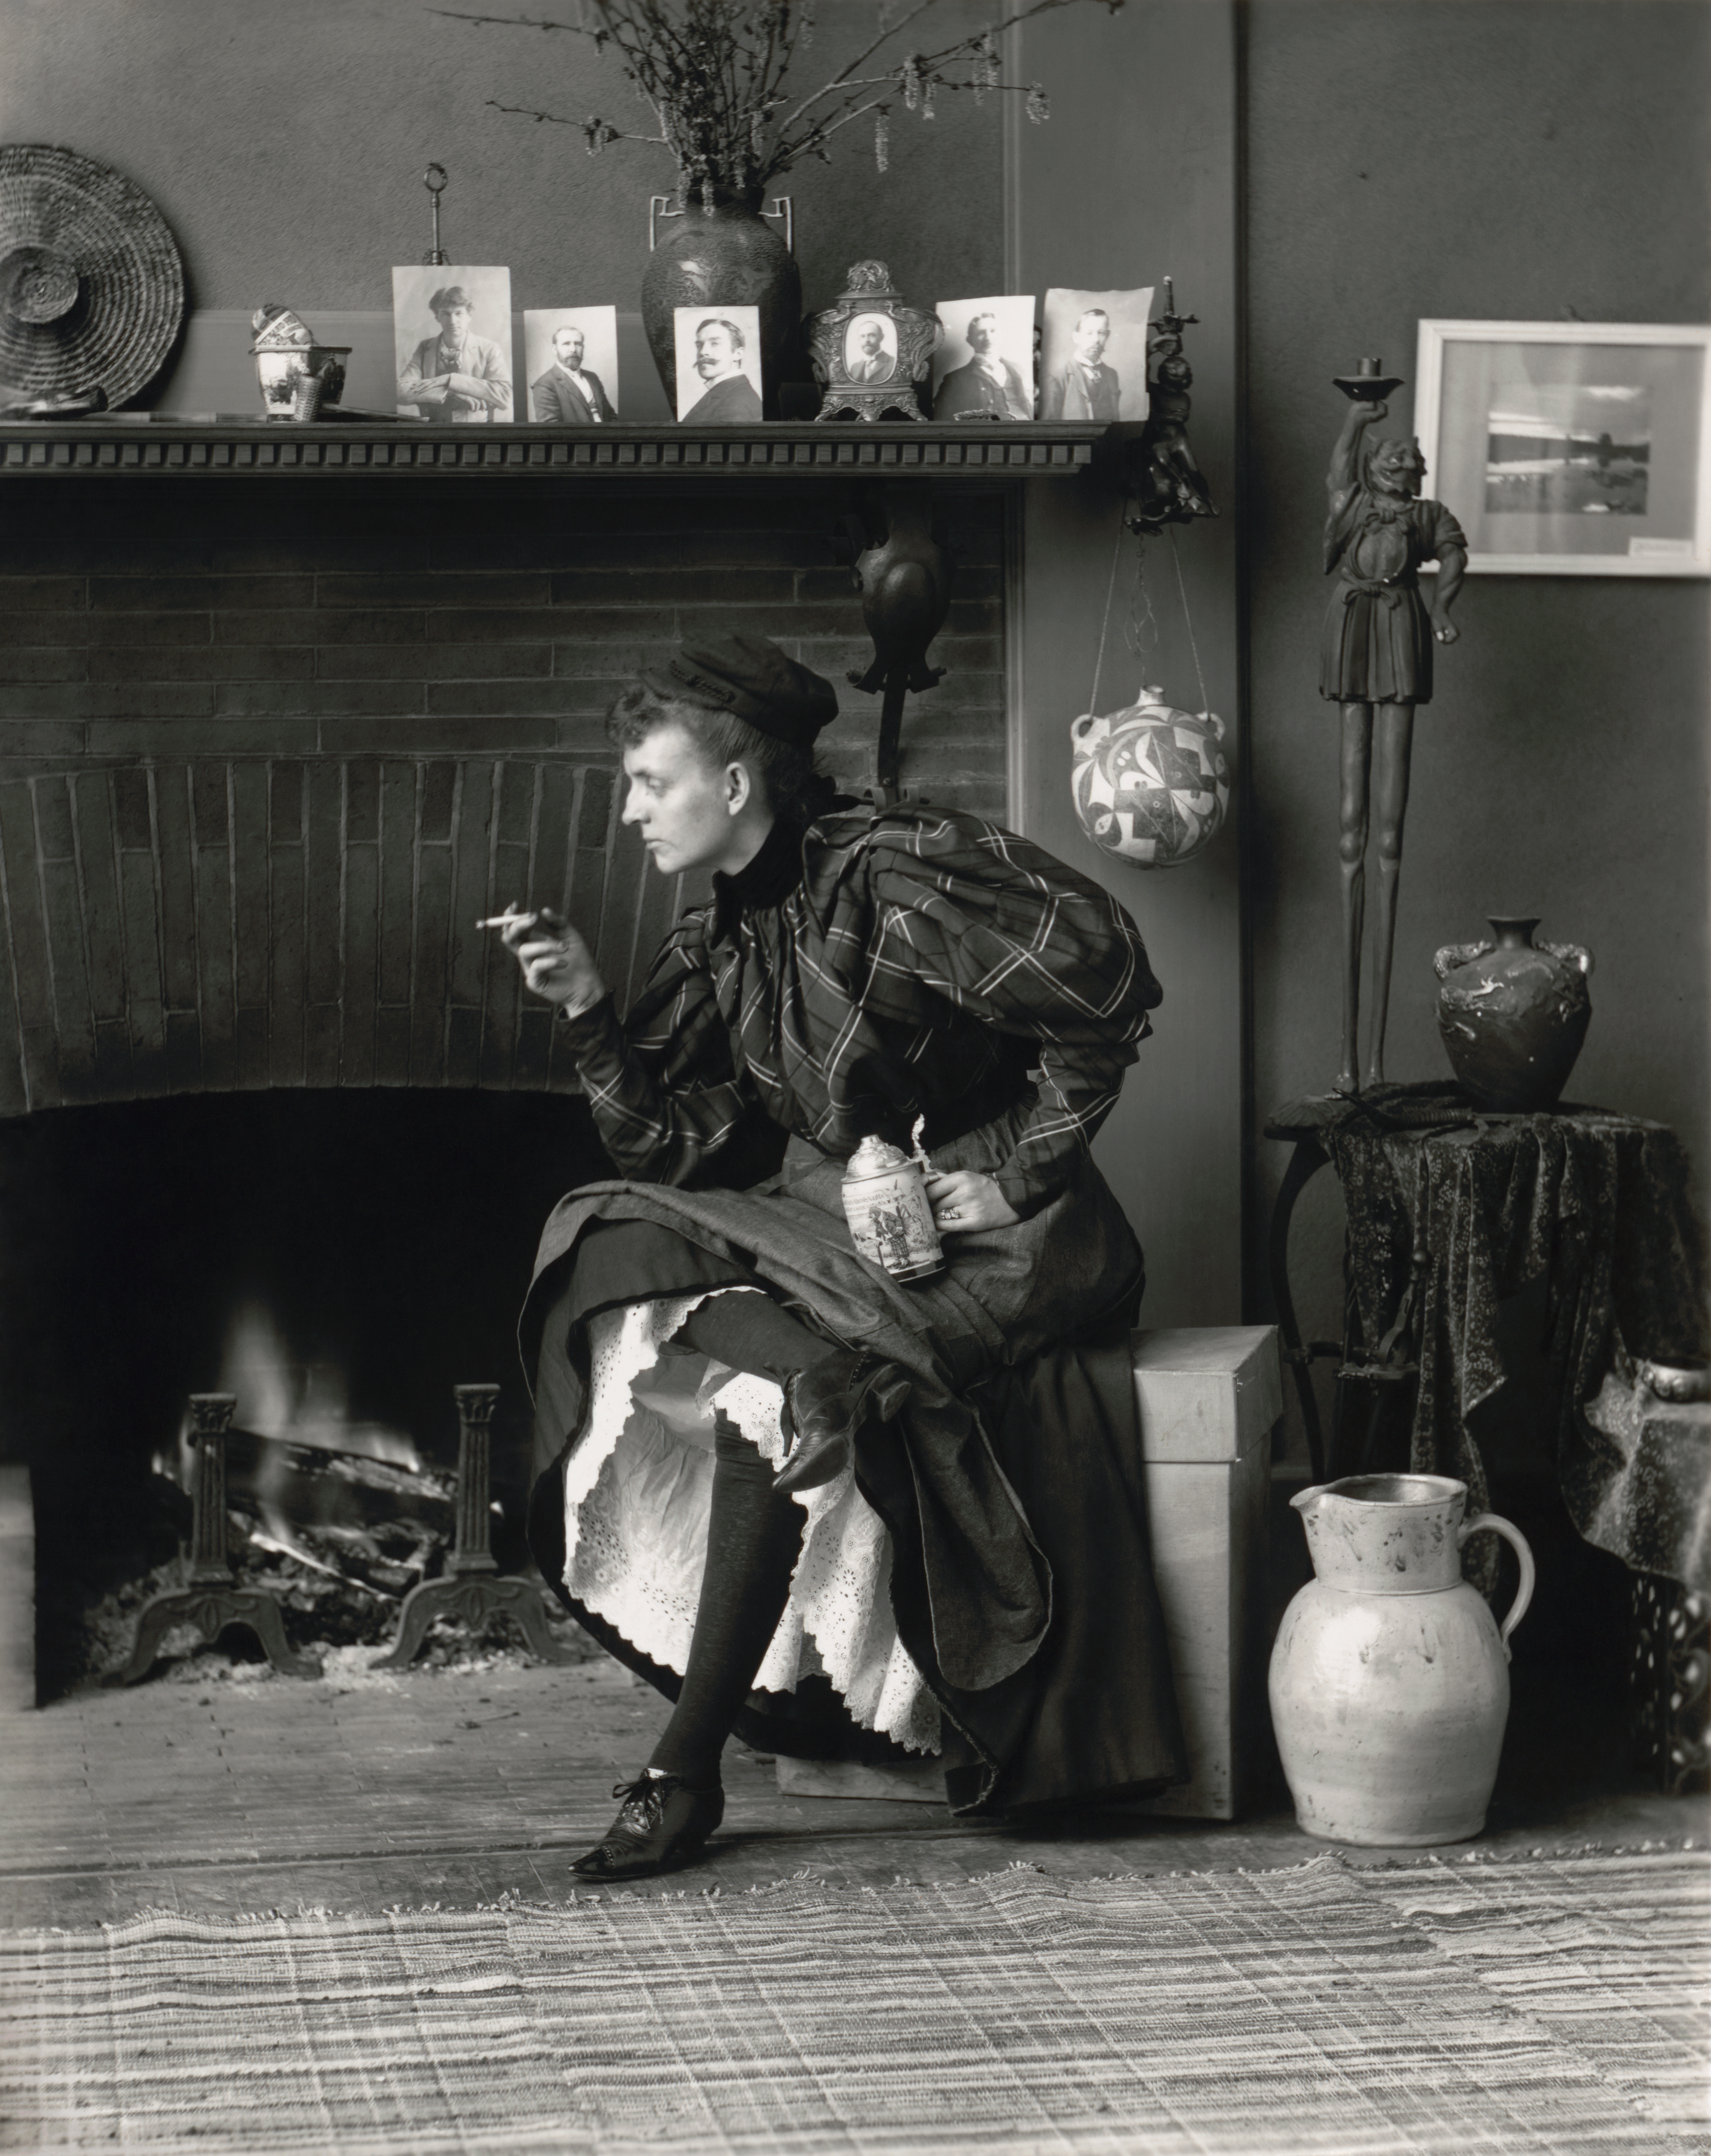 Frances Benjamin Johnston’s “New Woman,” a full-length self-portrait holding a cigarette in one hand and a beer stein in the other, in her Washington, D.C. studio. Library of Congress.